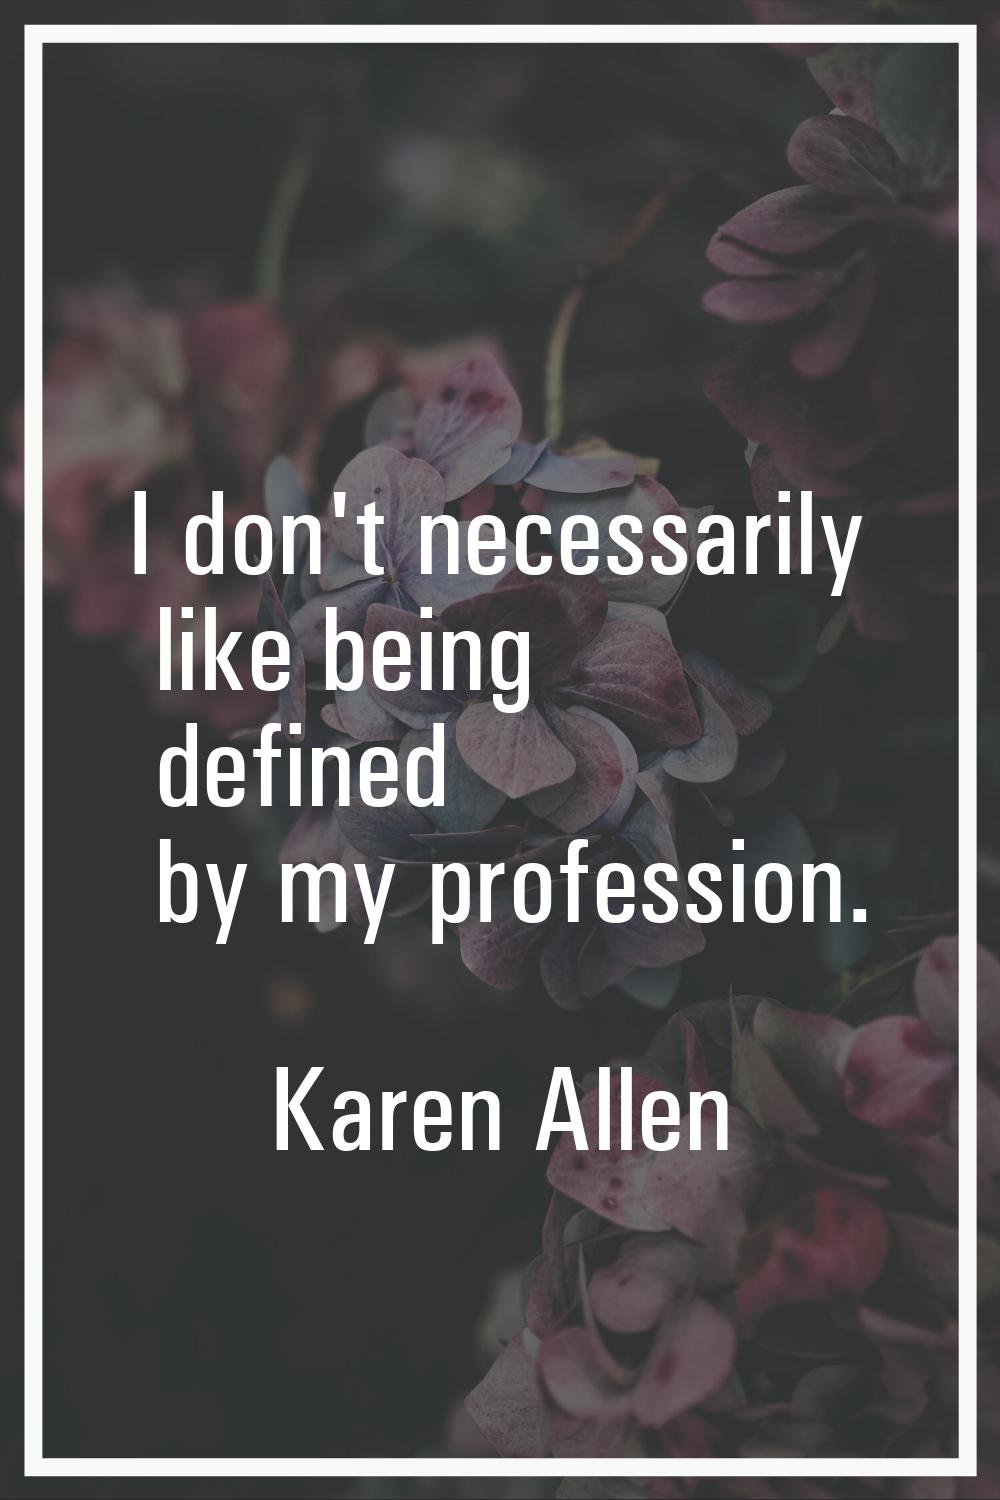 I don't necessarily like being defined by my profession.